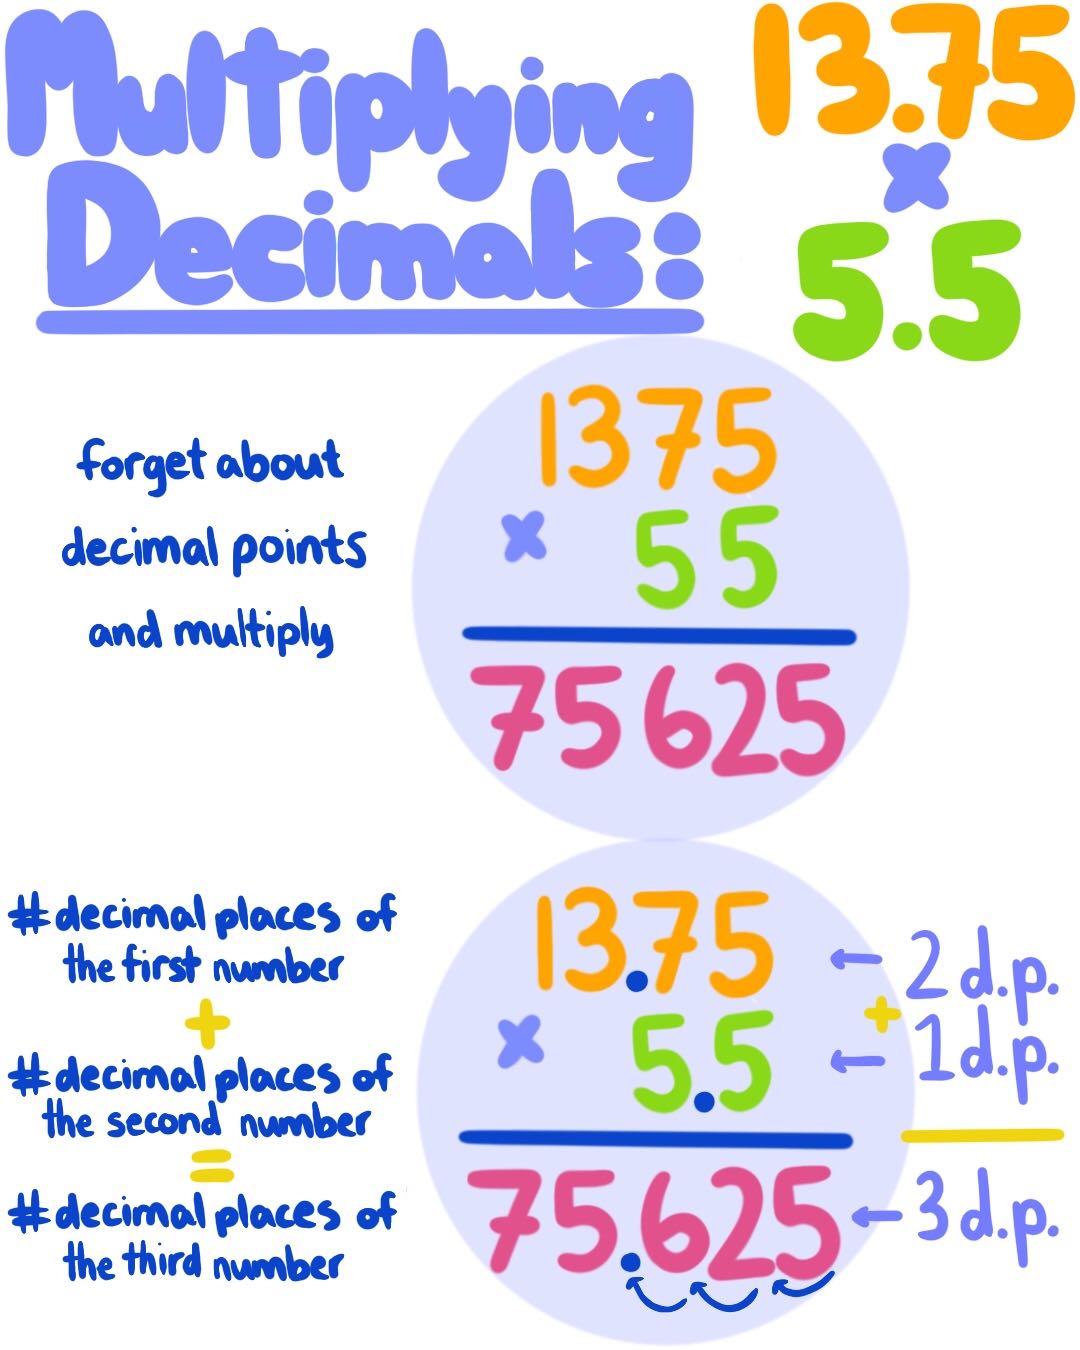 Multiply and Divide Decimals - MR. PIPER - CLAYBURN MIDDLE SCHOOL Within Dividing Decimals Worksheet Pdf